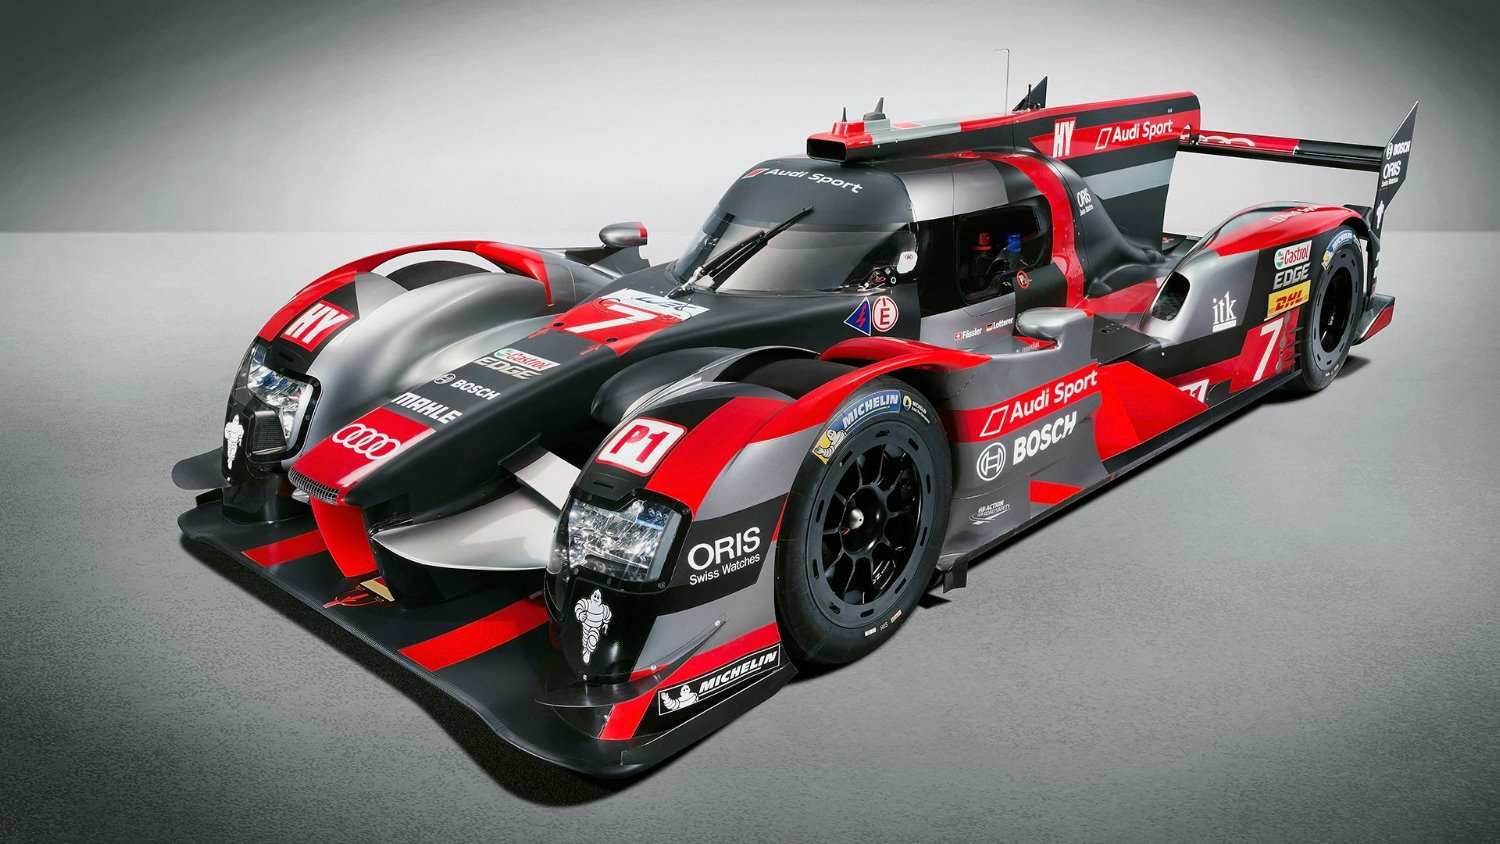 Over 1,000 HP for the new Audi R18